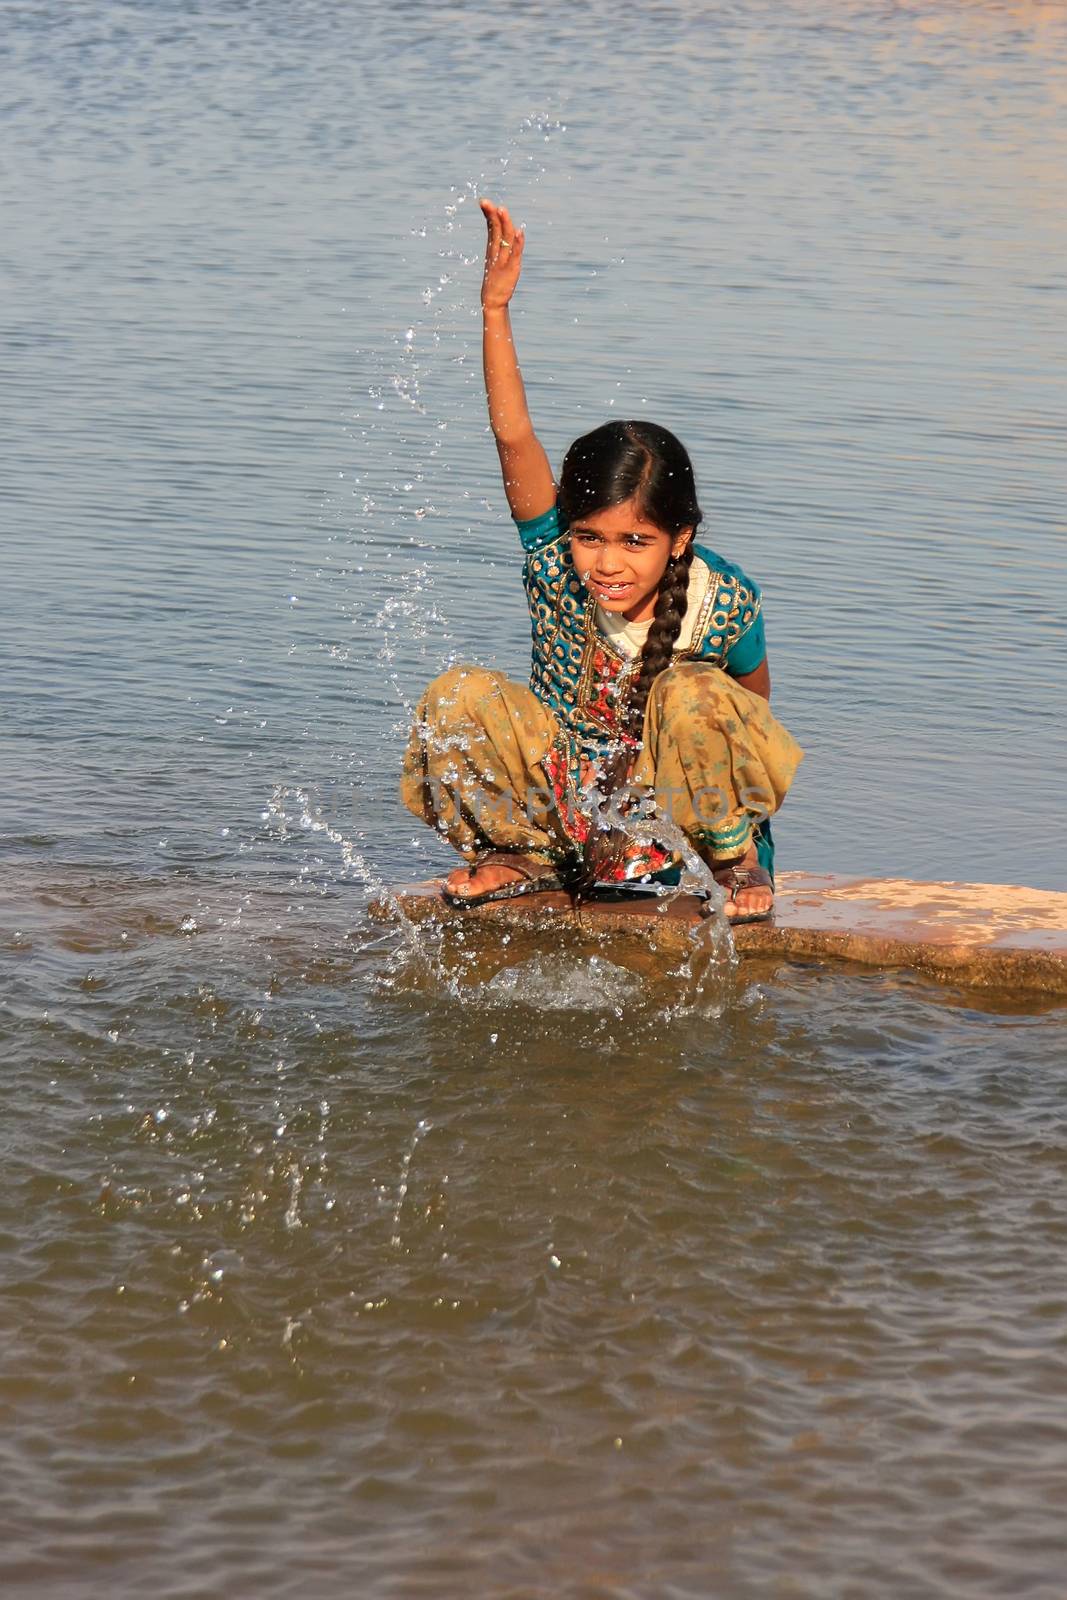 Local girl playing near water reservoir, Khichan village, India by donya_nedomam